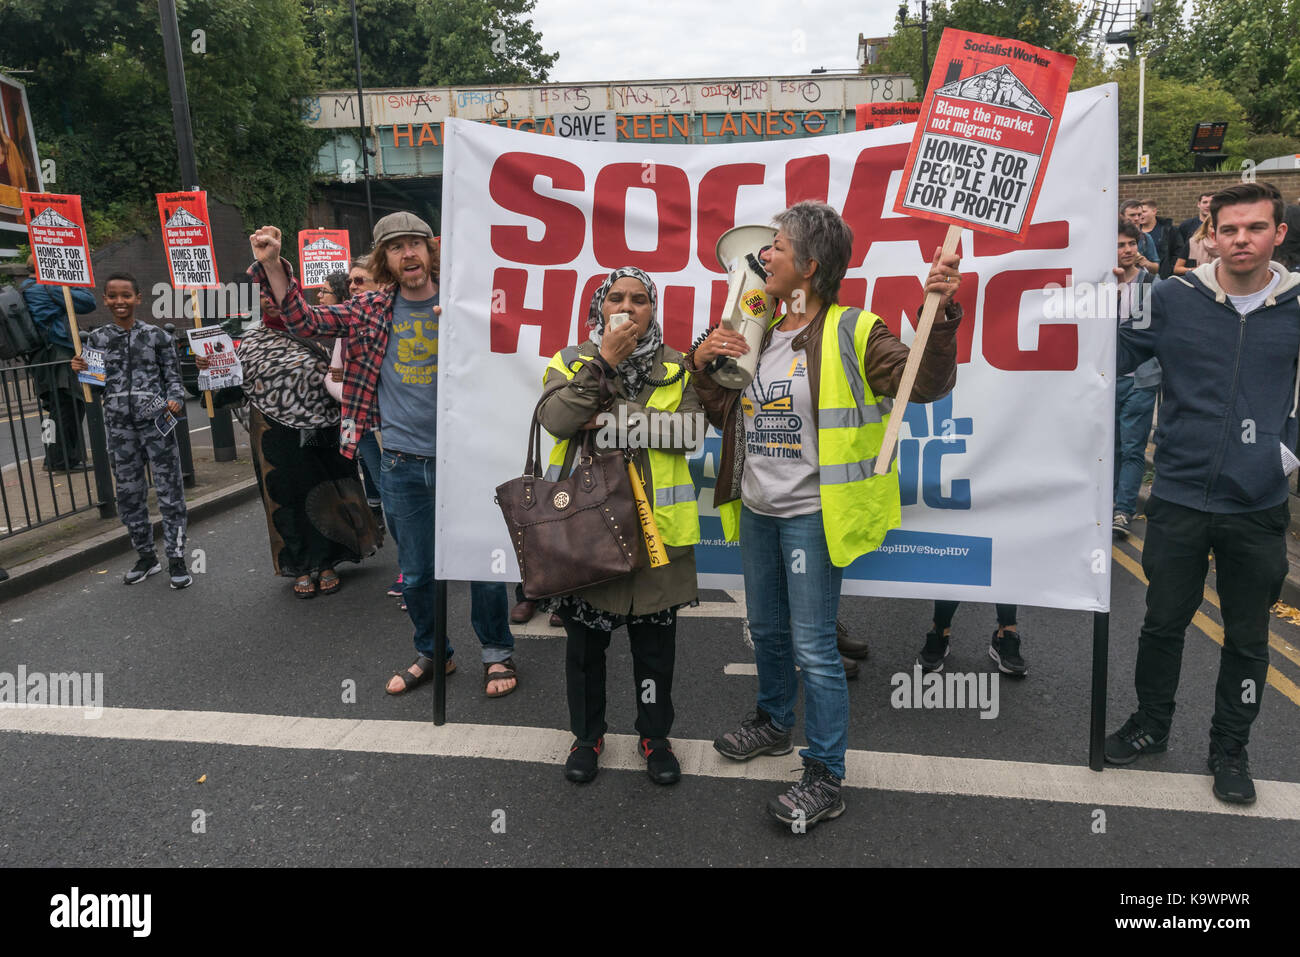 London, UK. 23rd Sep, 2017. London, UK. 23rd September 2017. Hundreds march in North London from a rally in Tottenham to Finsbury Park against the so called Haringey Development Vehicle, under which Haringey Council is making a huge transfer of council housing to Australian multinational Lendlease. This will result in the imminent demolition of over 1,300 council homes on the Northumberland Park estate, followed by similar loss of social housing across the whole of the borough. At Â£2 billion, his is the largest giveaway of council housing and assets to a private corporation yet in the U Stock Photo